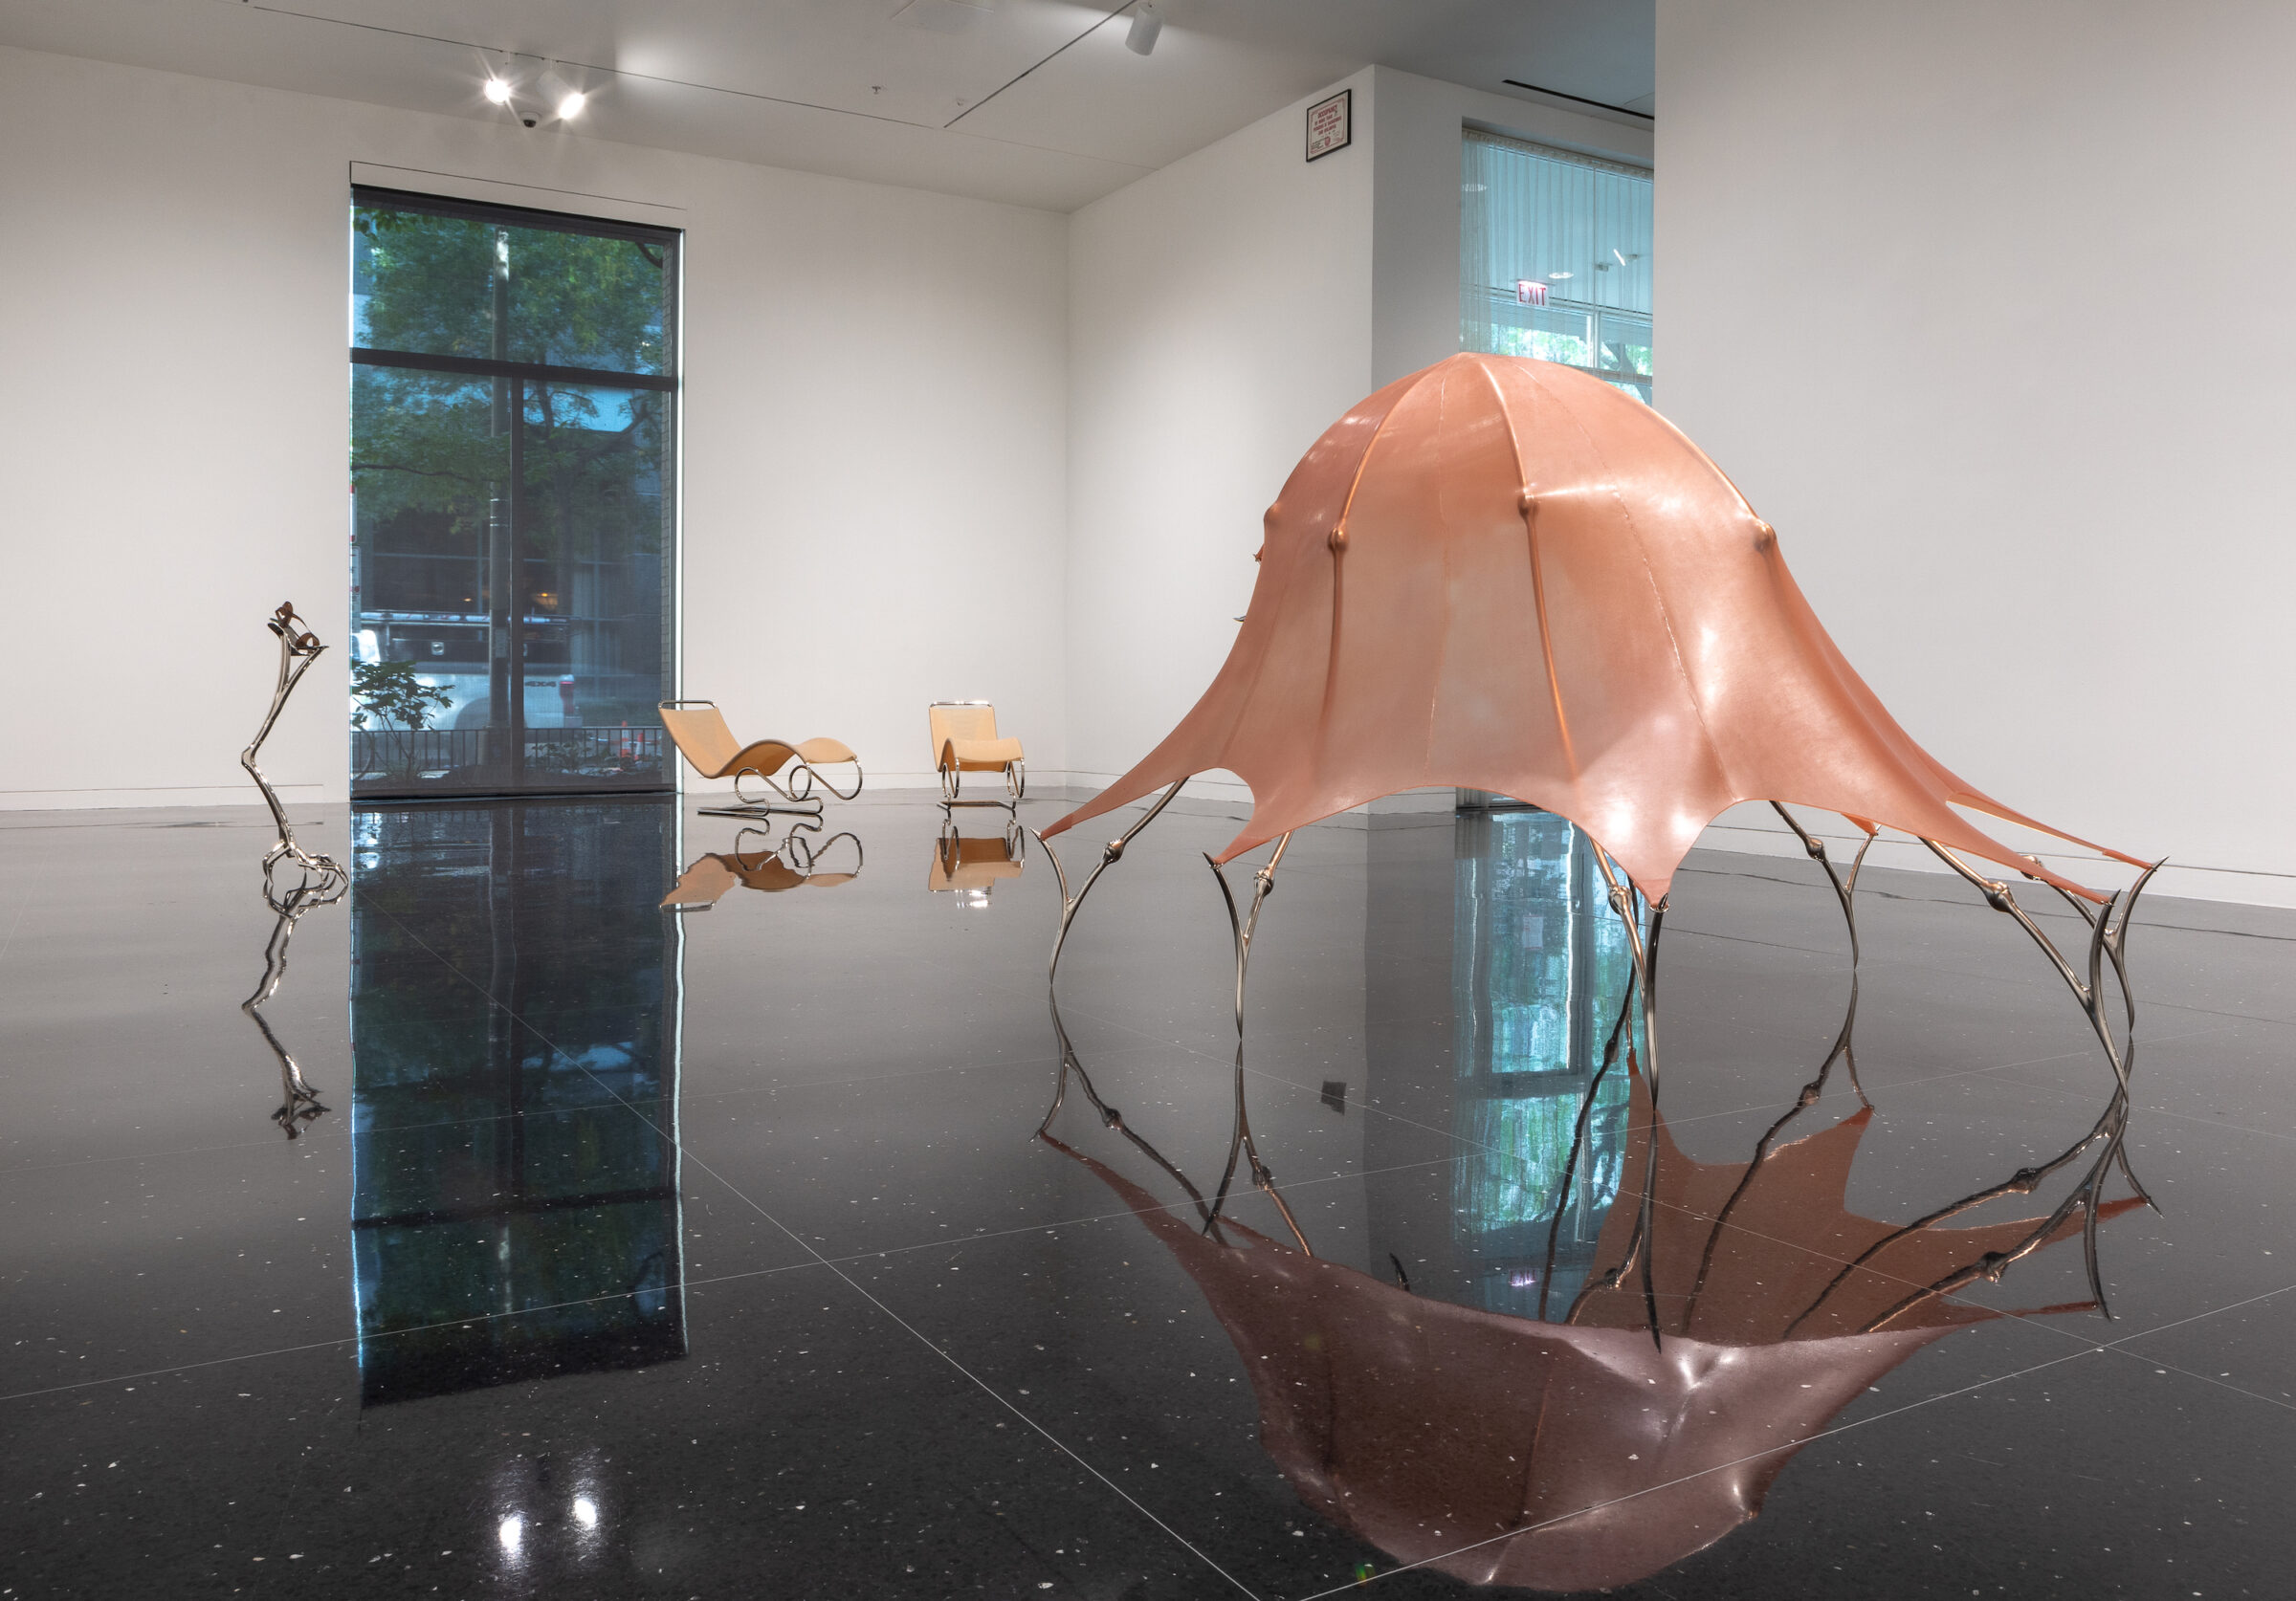 A large sculpture made of steel and latex and resembling an umbrella shape stands in a white gallery. A pair of steel stilts and two lounge chairs, also in latex and steel, are visible in the background.